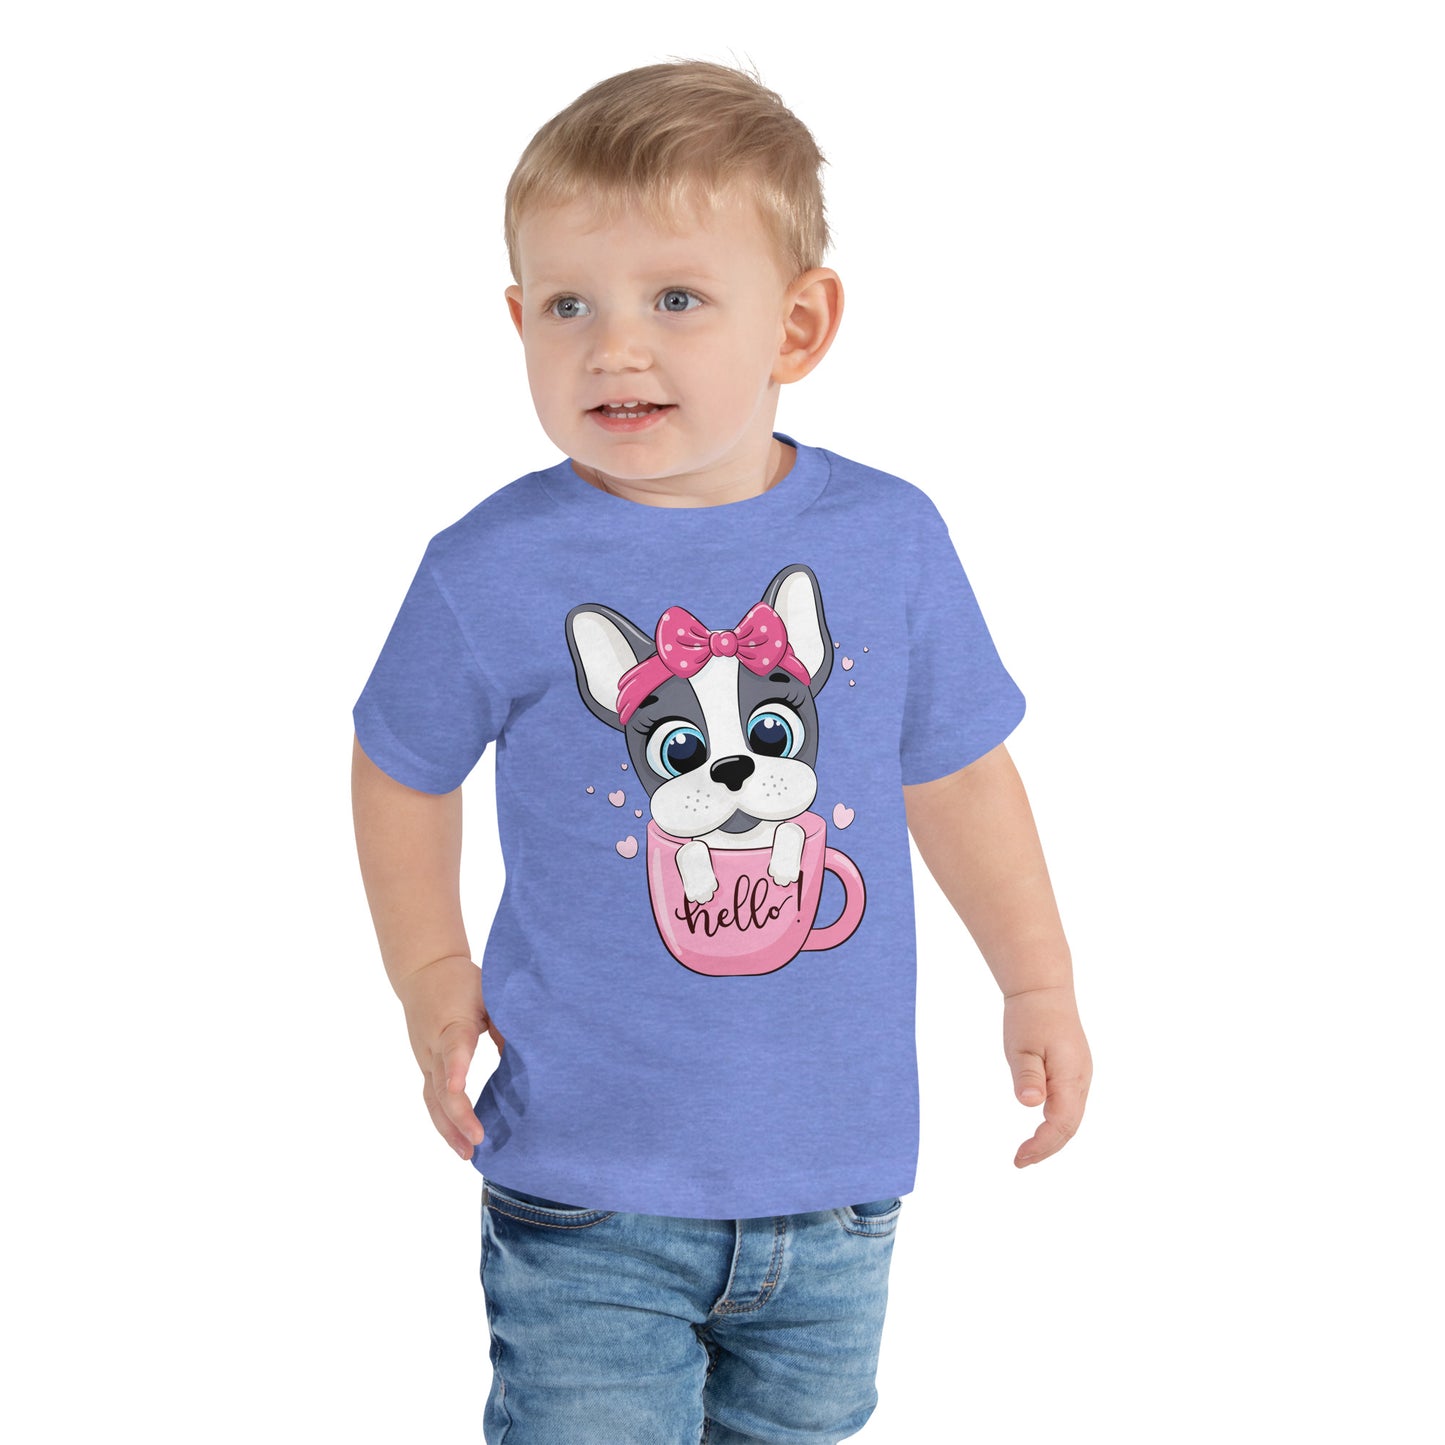 Cute Puppy Dog in Cup T-shirt, No. 0371